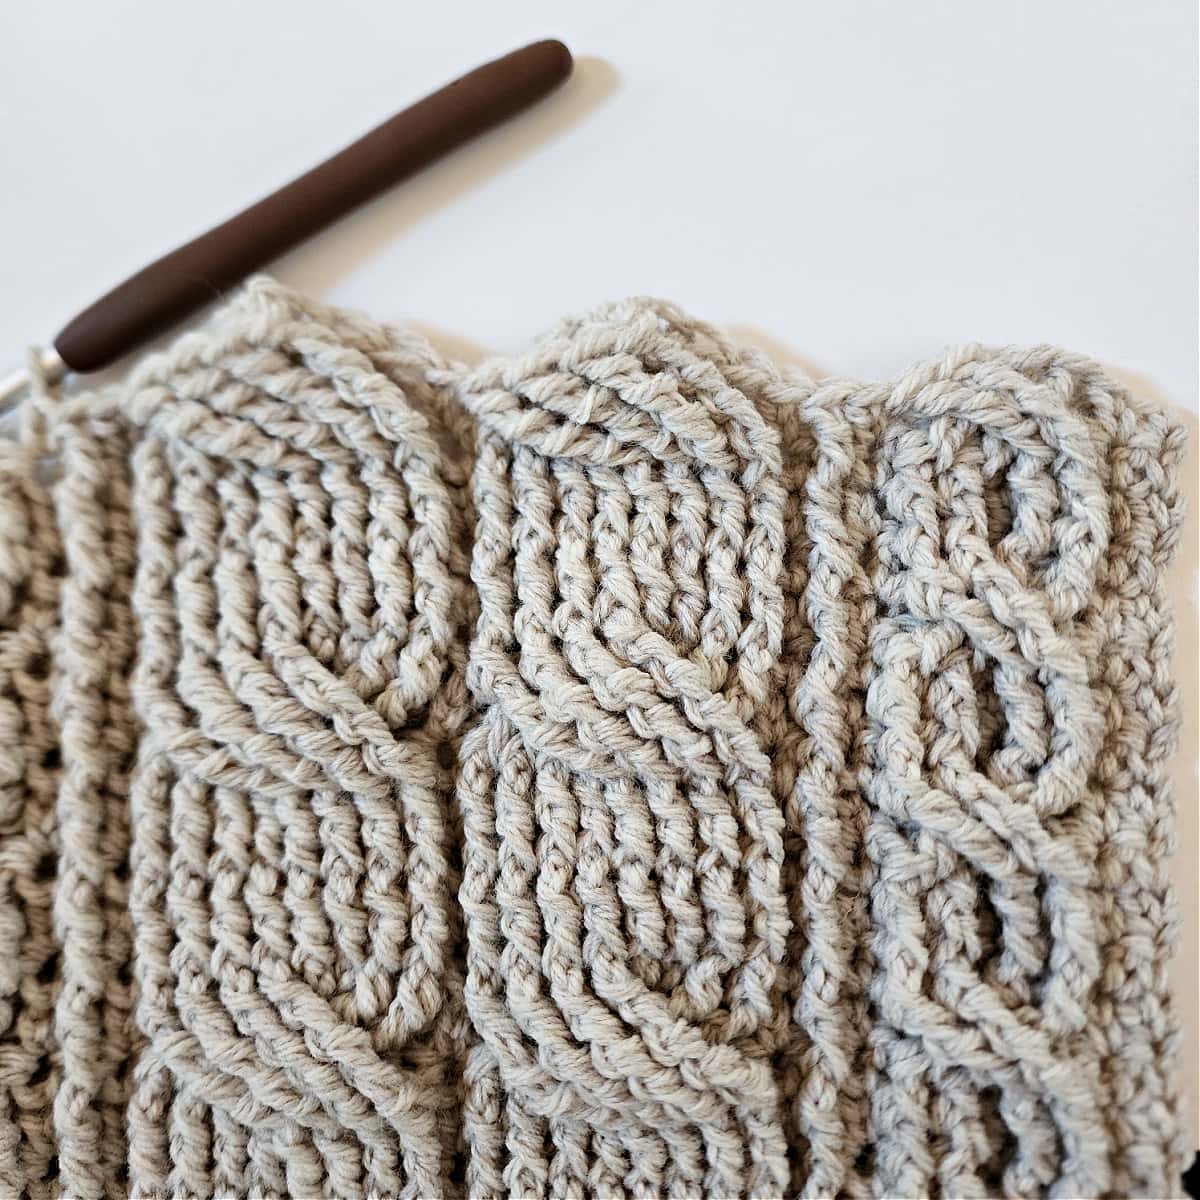 One narrow crochet cable and two wide crochet cables complete for cardigan.